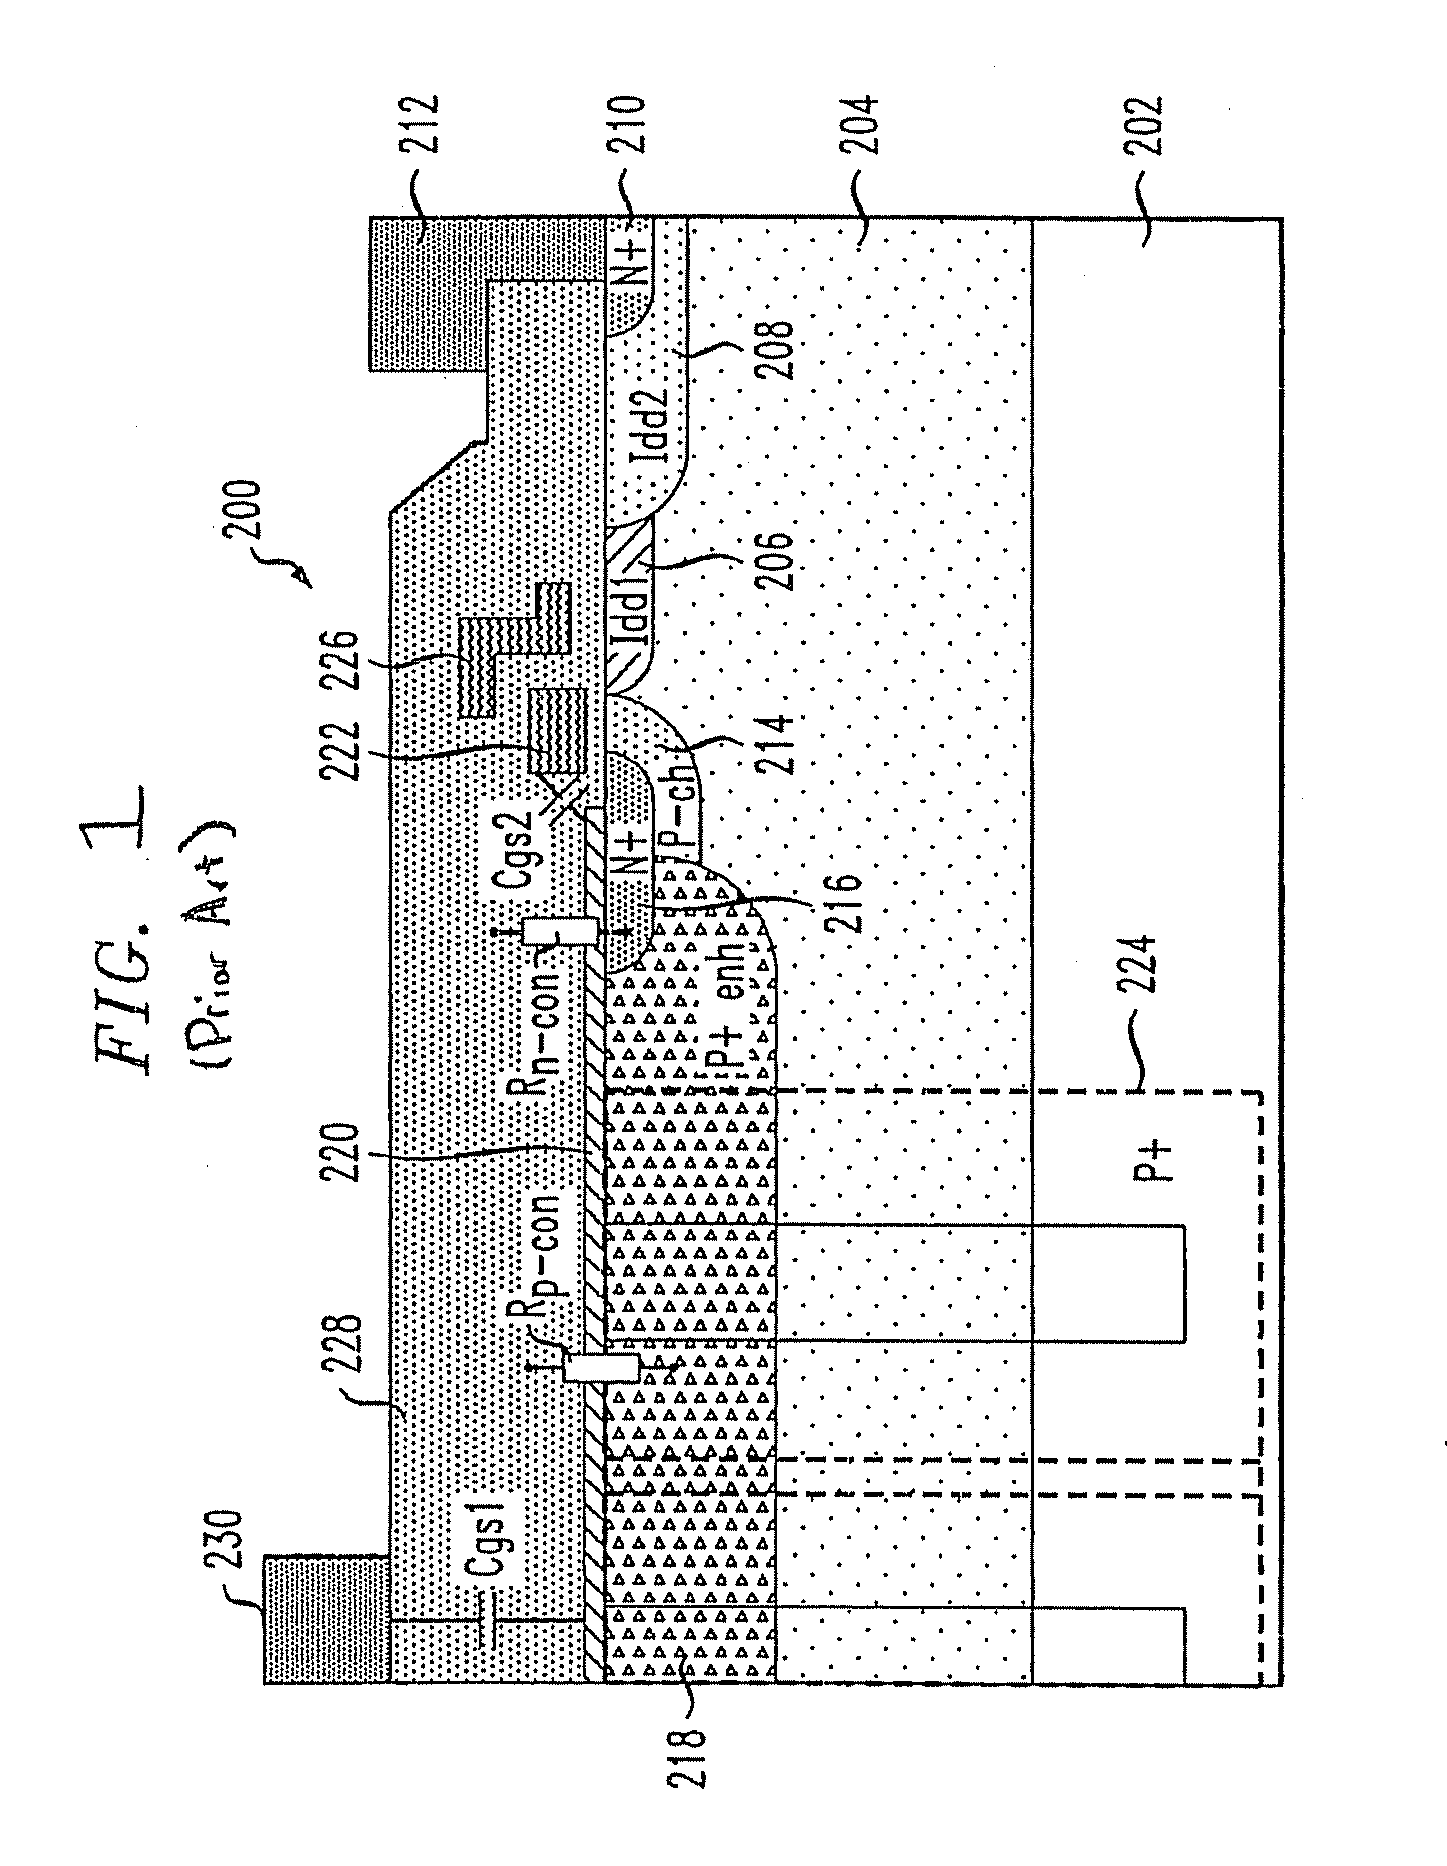 Mosfet device having dual interlevel dielectric thickness and method of making same